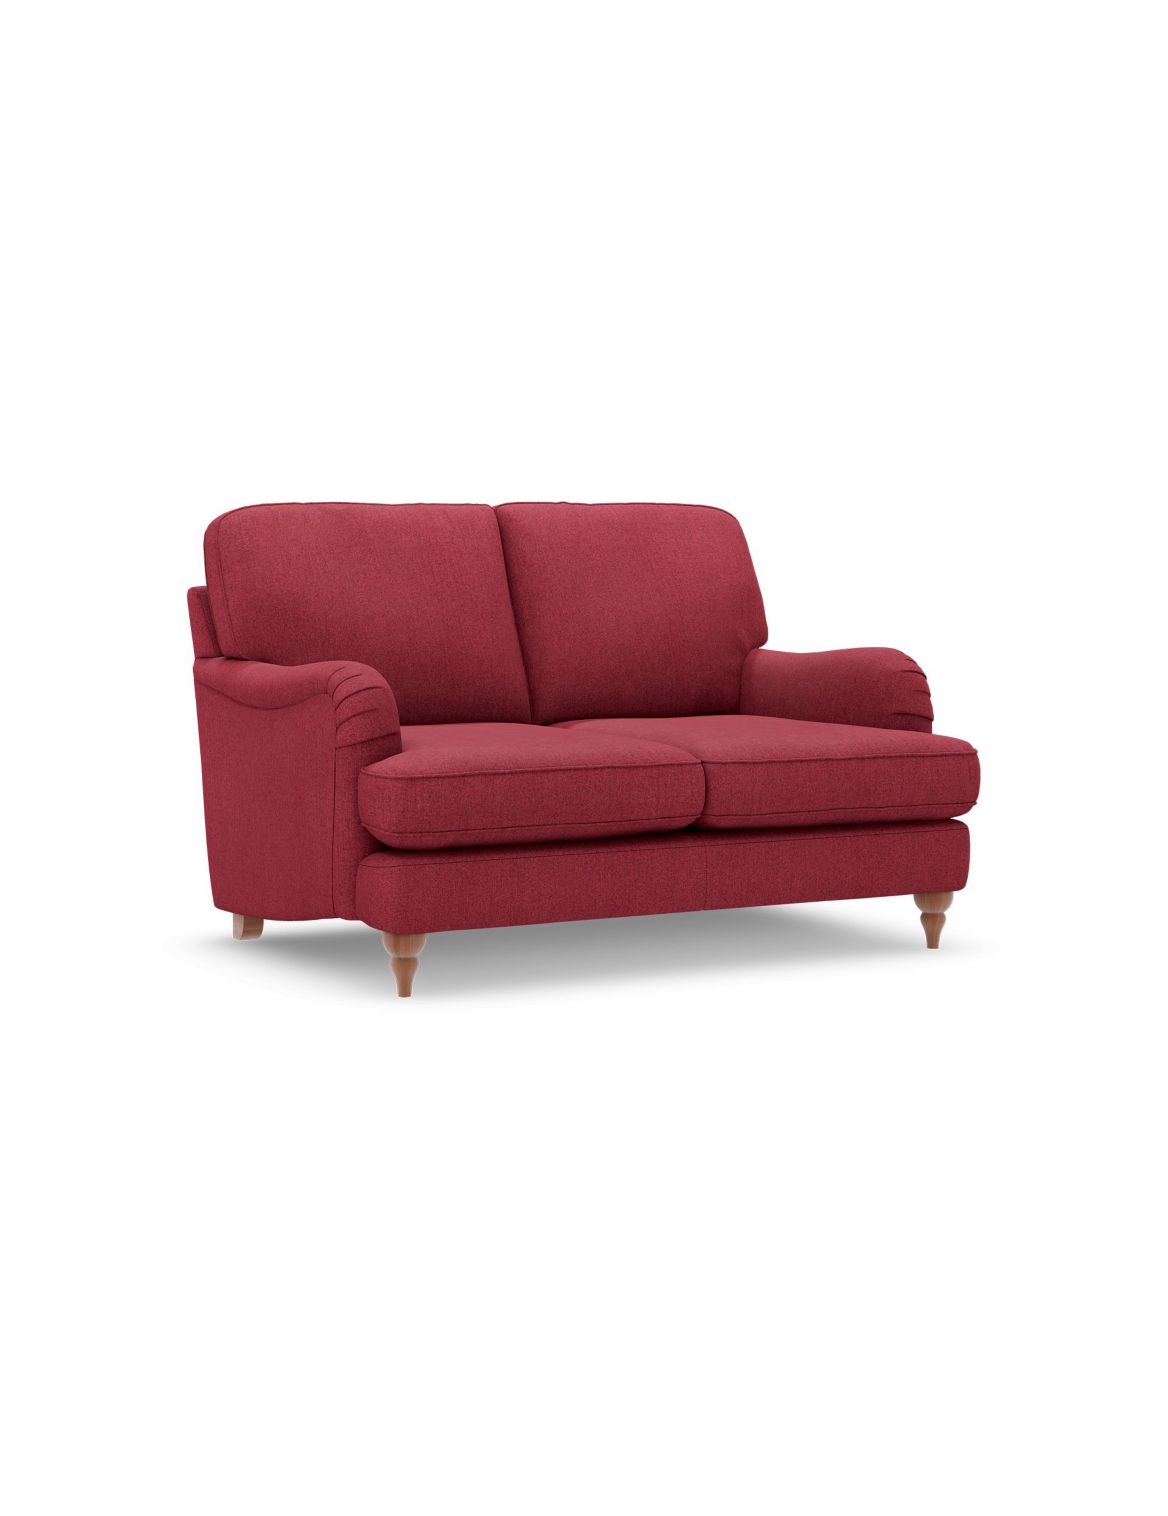 Rochester Compact Sofa red